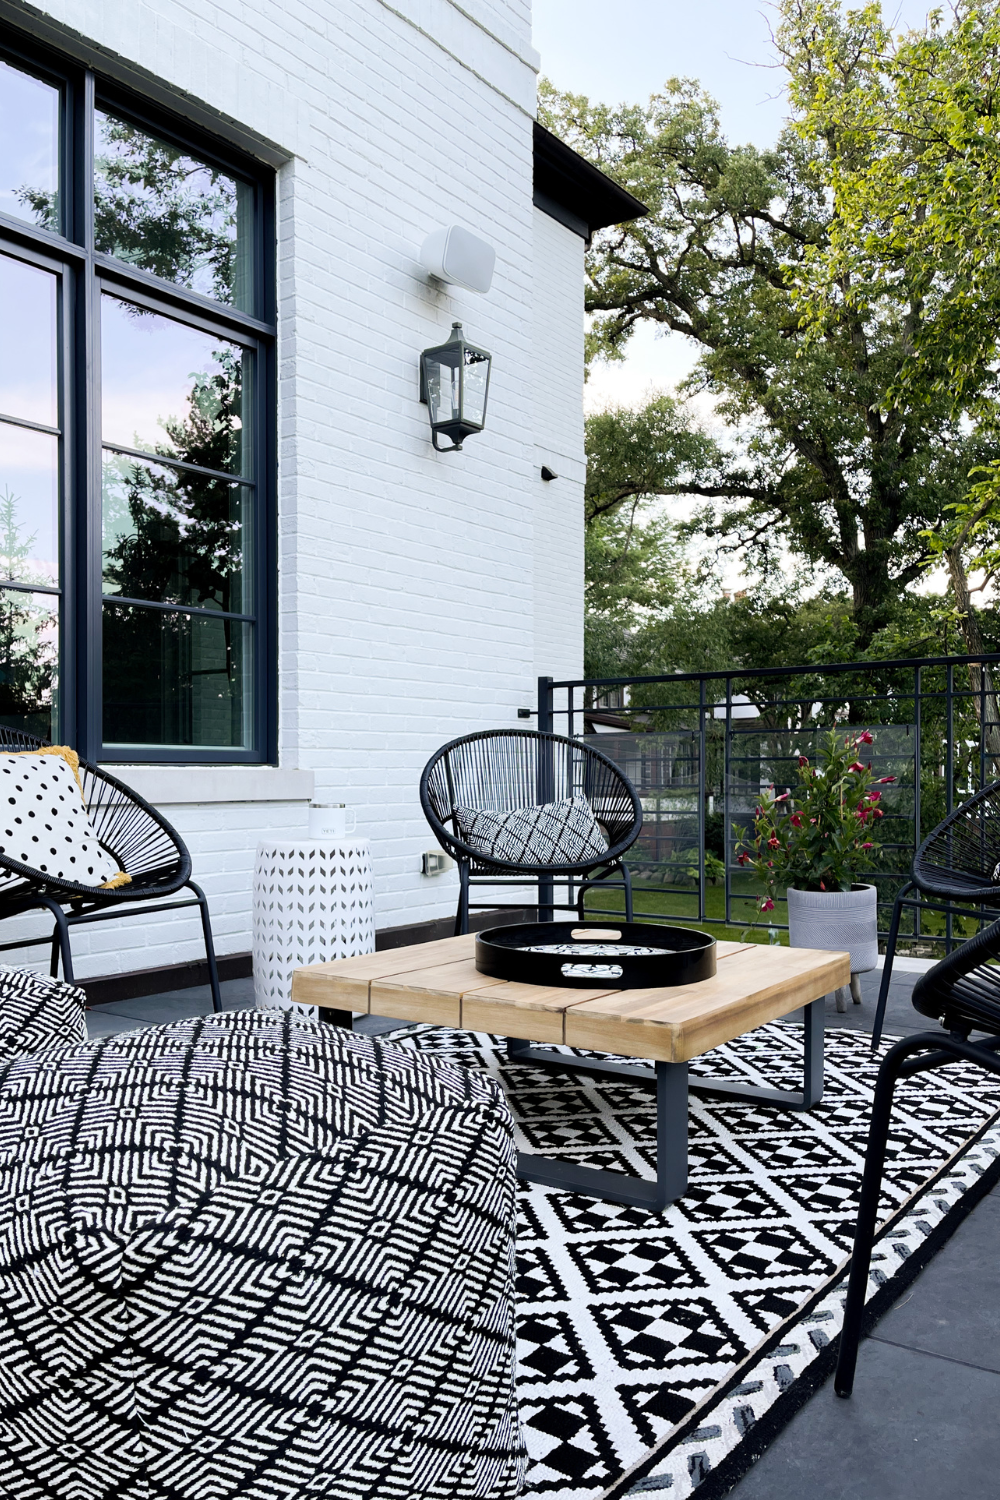 Outdoor seating area with black circle chairs, a printed rug, wood table, and poufs